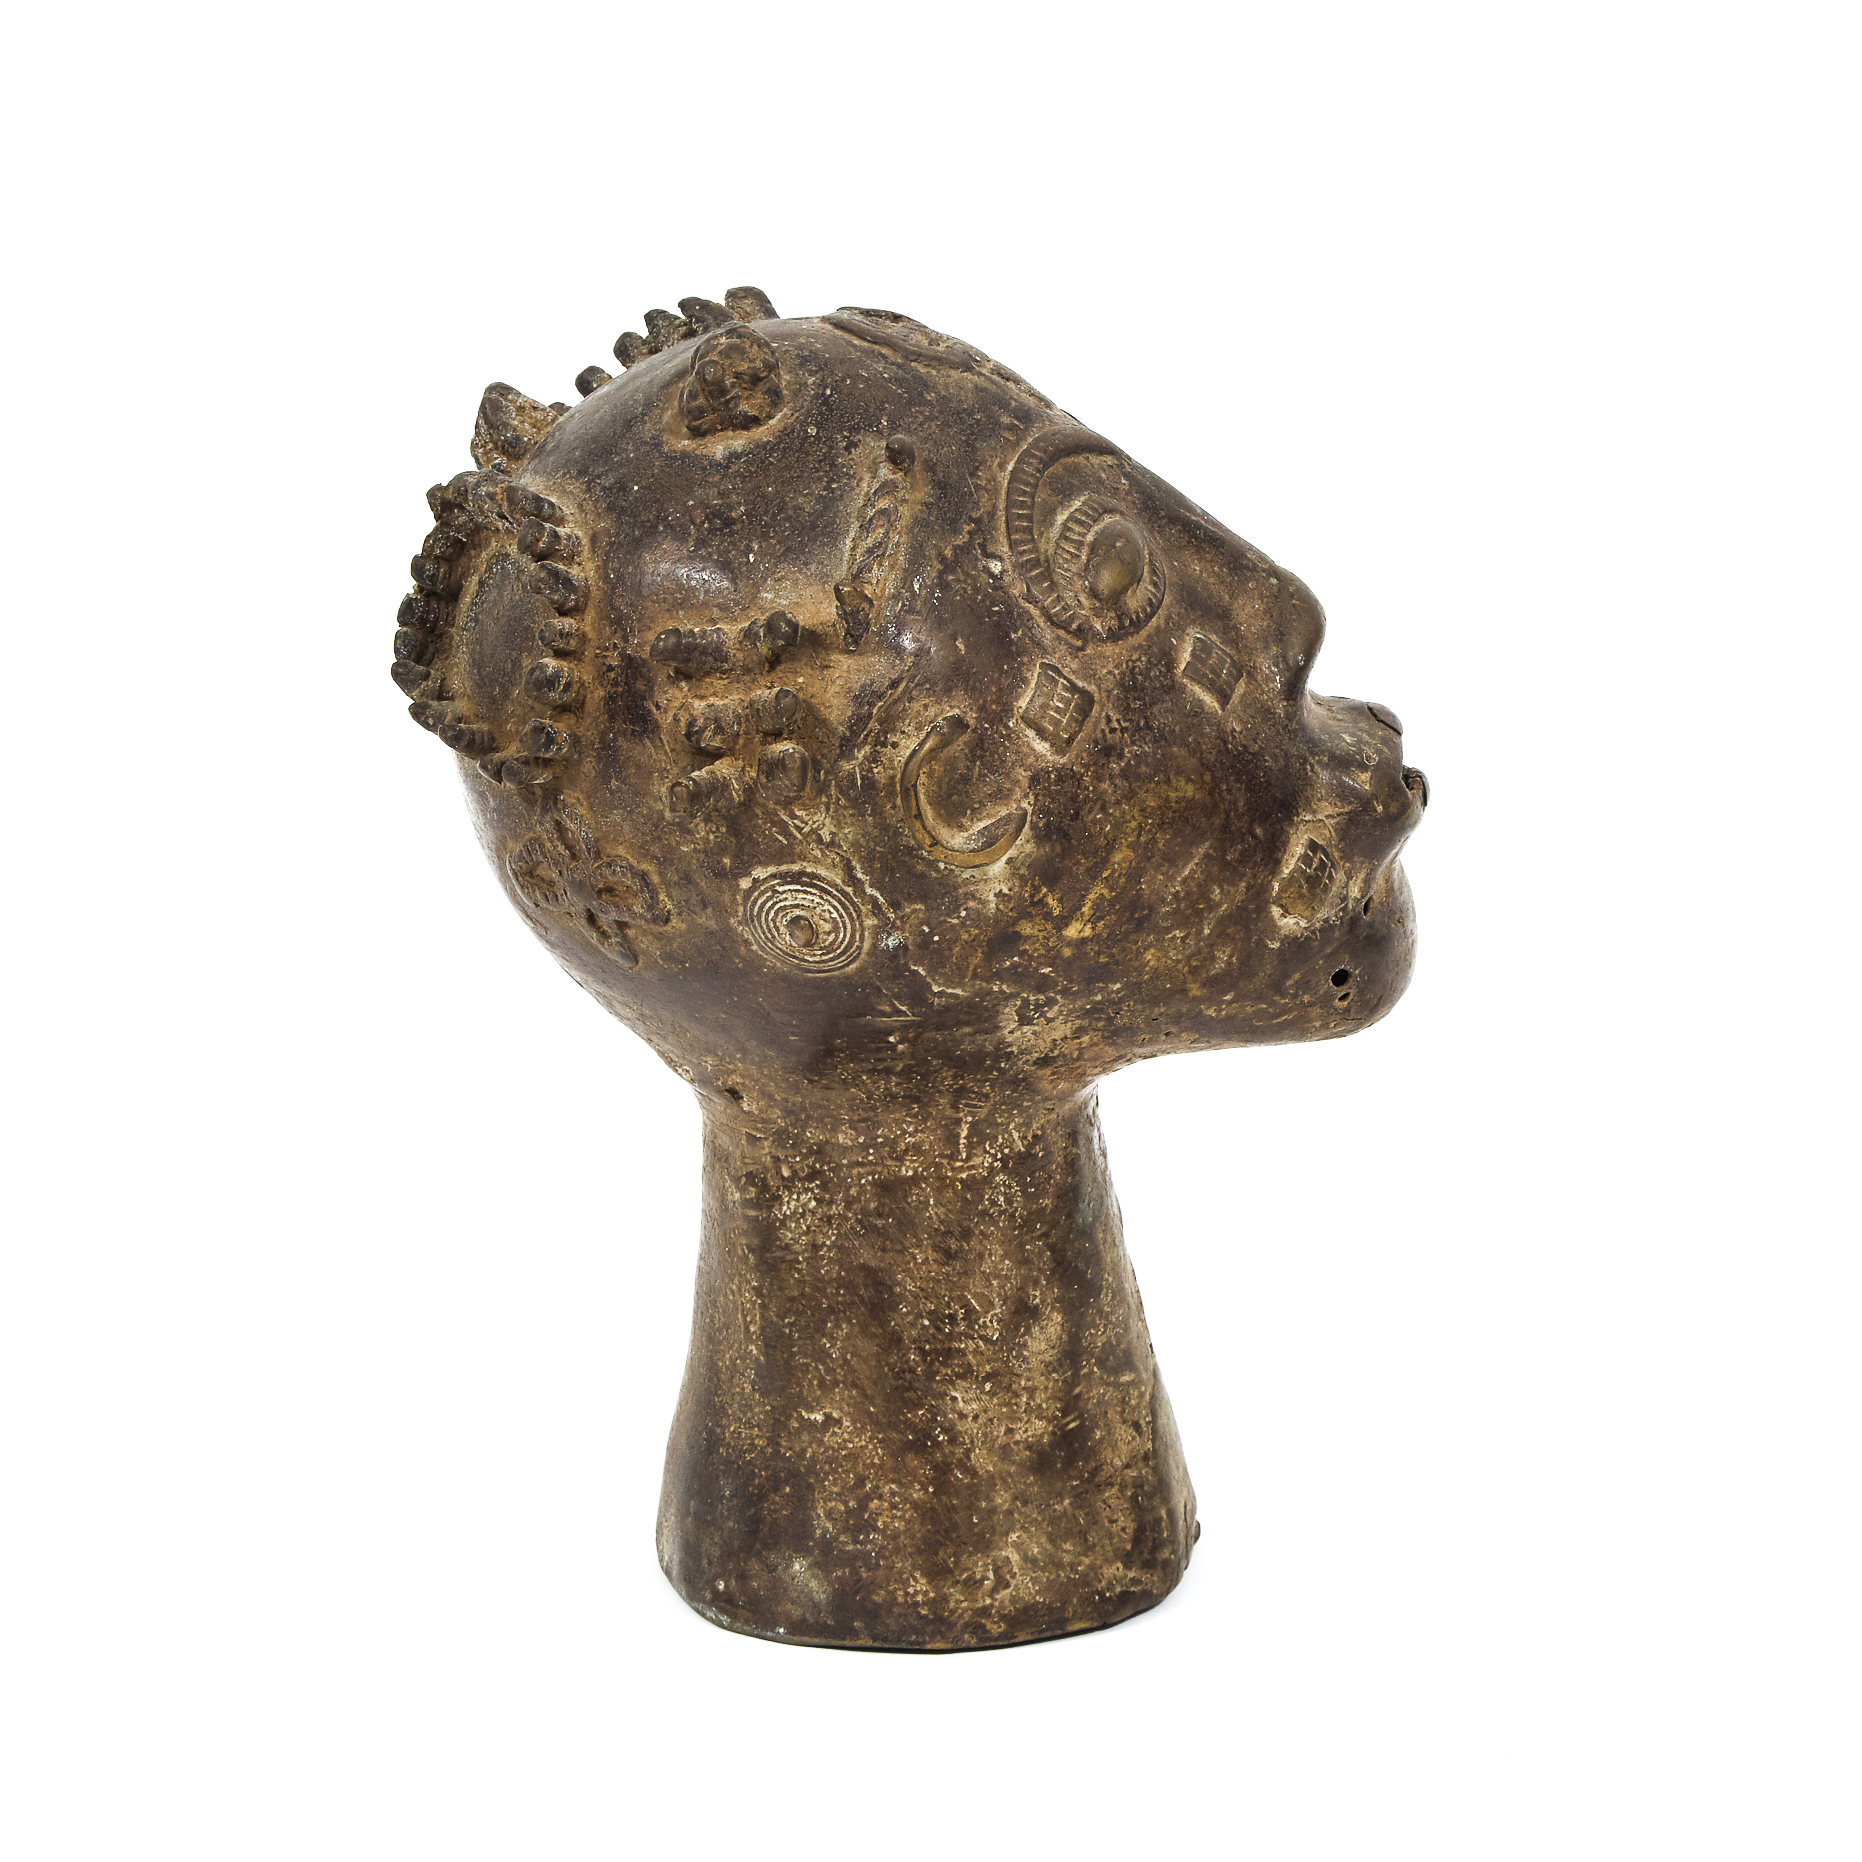 West African Bronze Head, possibly Akan or Ashanti, early to mid 20th century